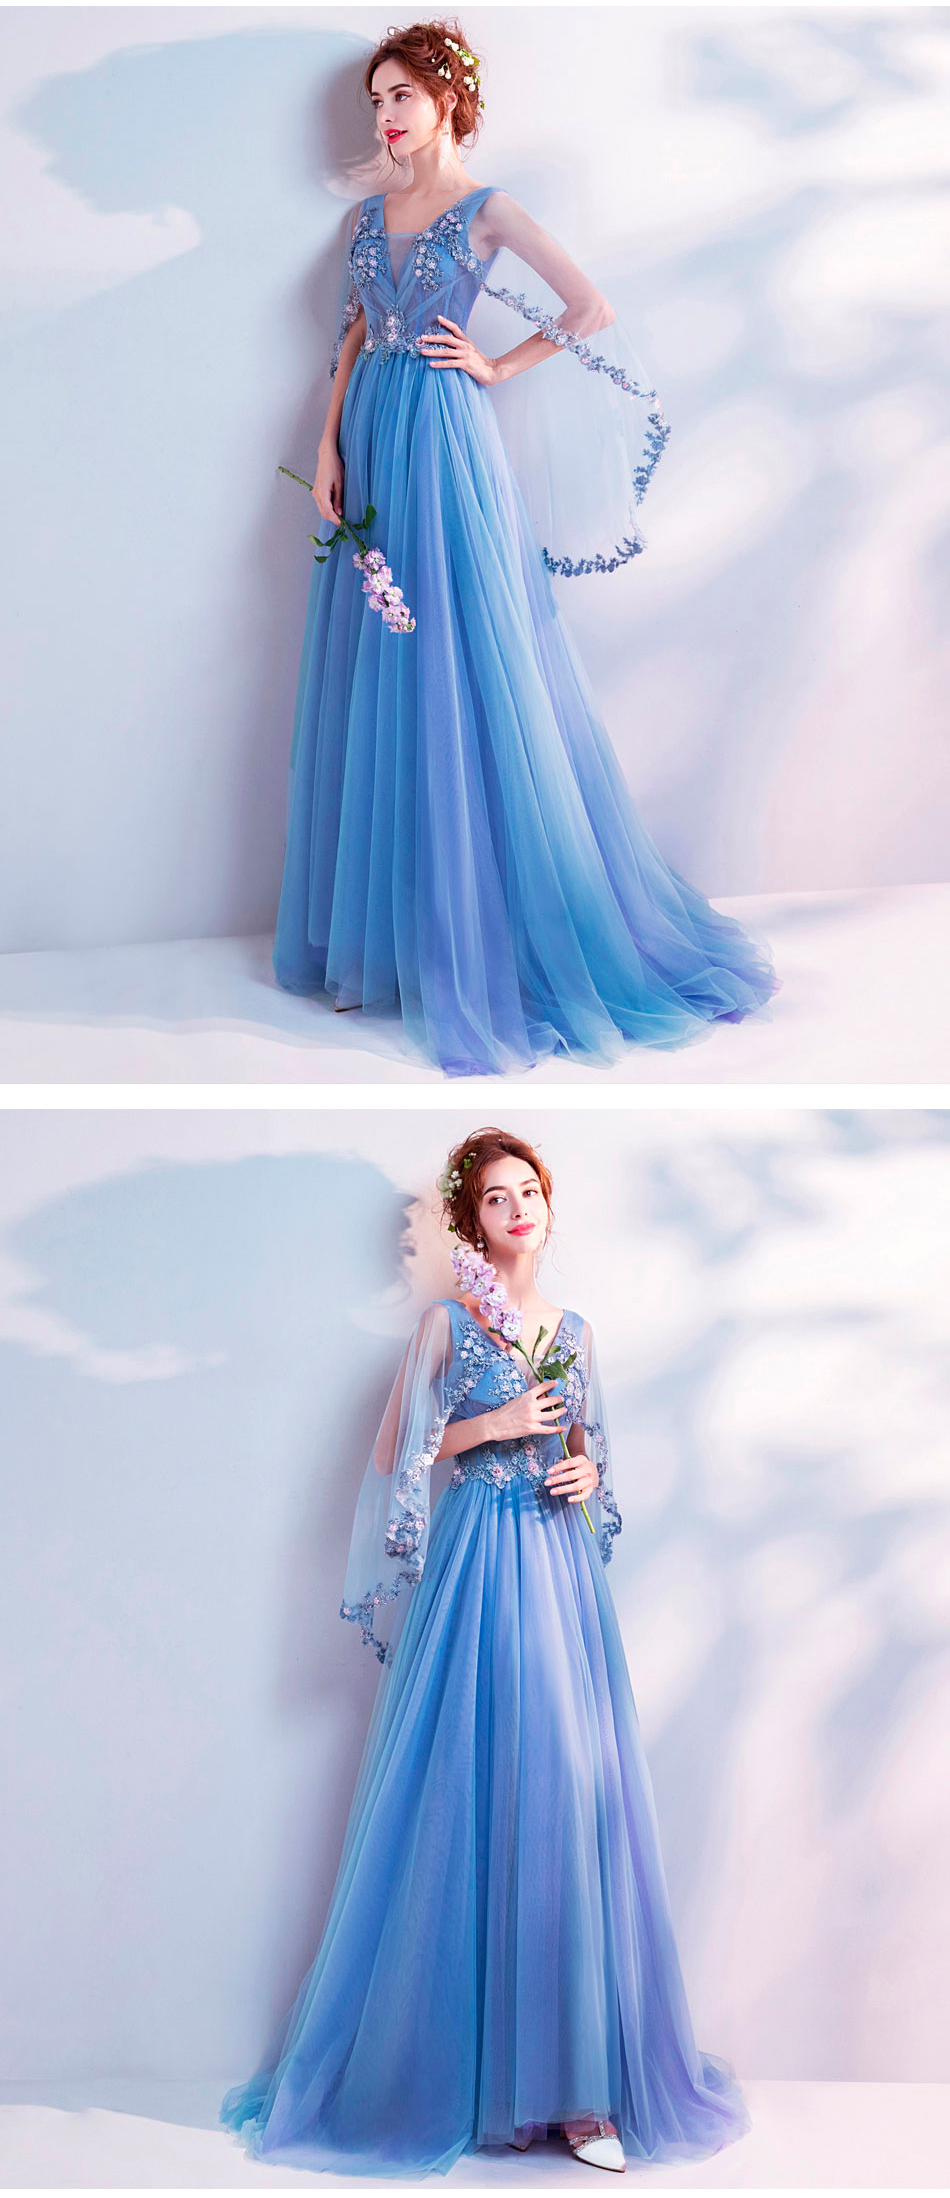 Beautiful Long Sleeve Blue Tulle Long Floral Prom Dress13